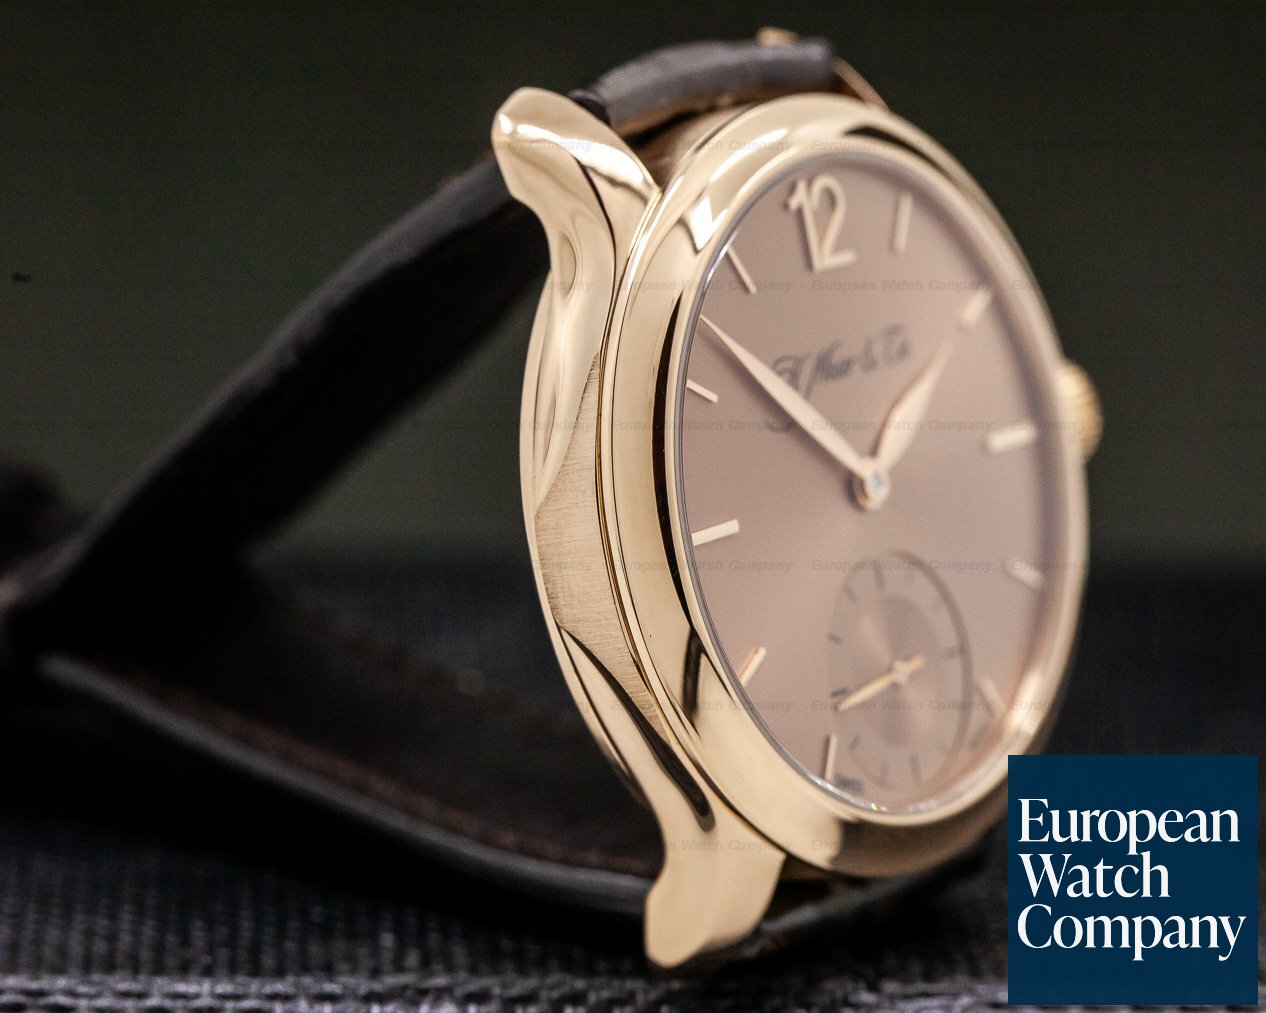 H. Moser & Cie Endeavour MAYU 18K Rose Gold Salmon Dial Ref. 321.503